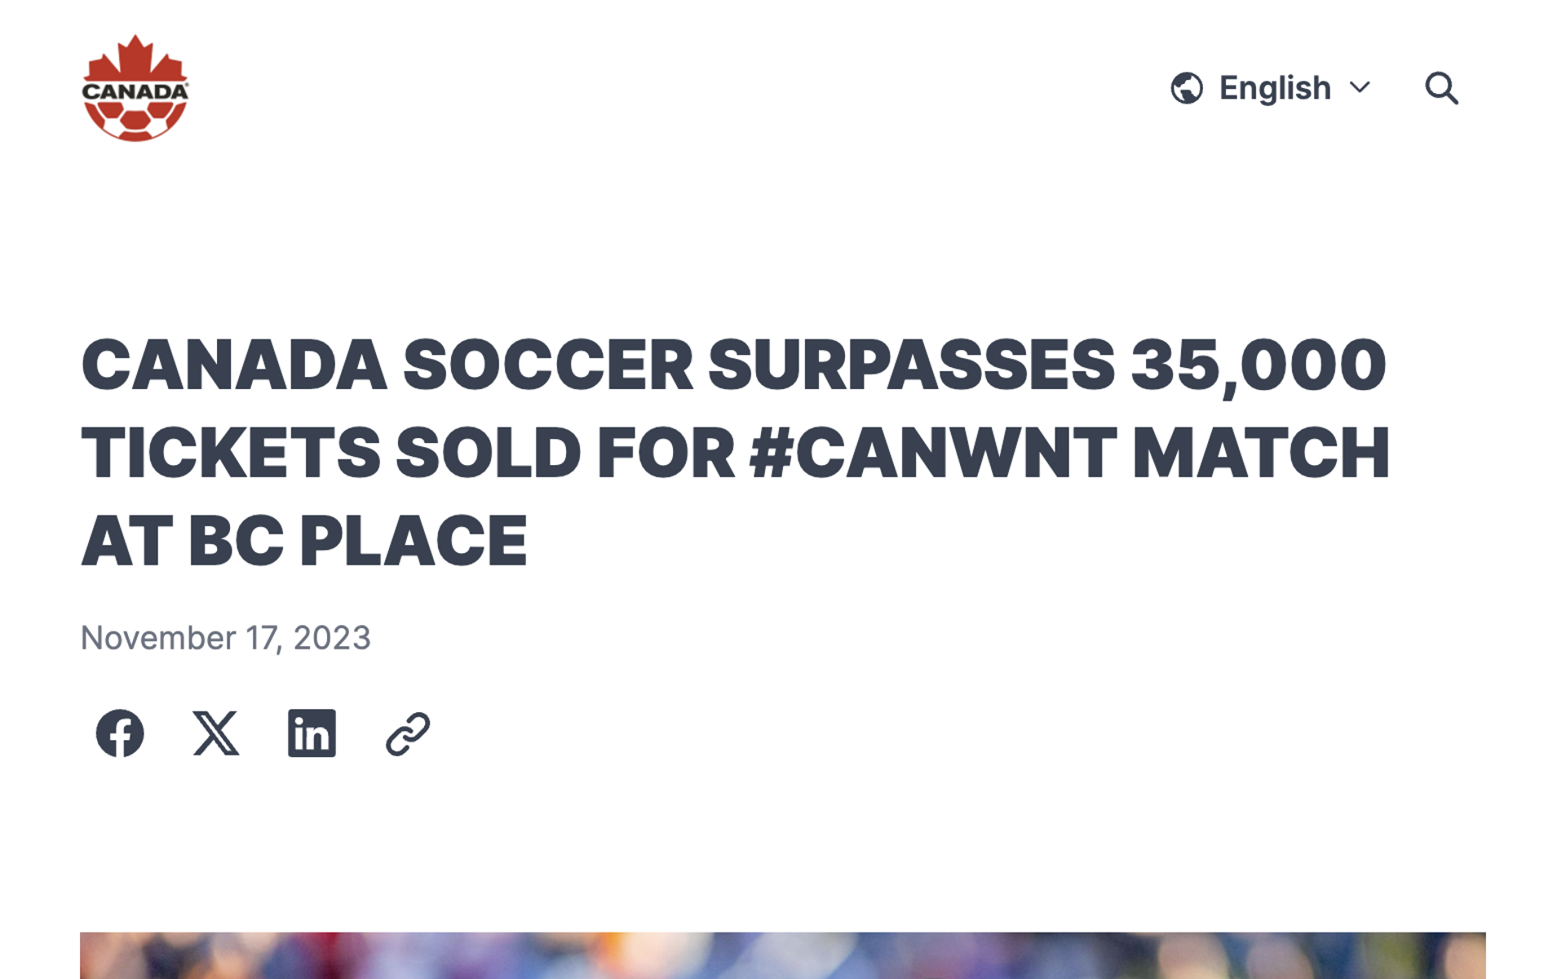 Announcing that over 35000 tickets were sold for the Canada Soccer Women’s National Team match versus Australia